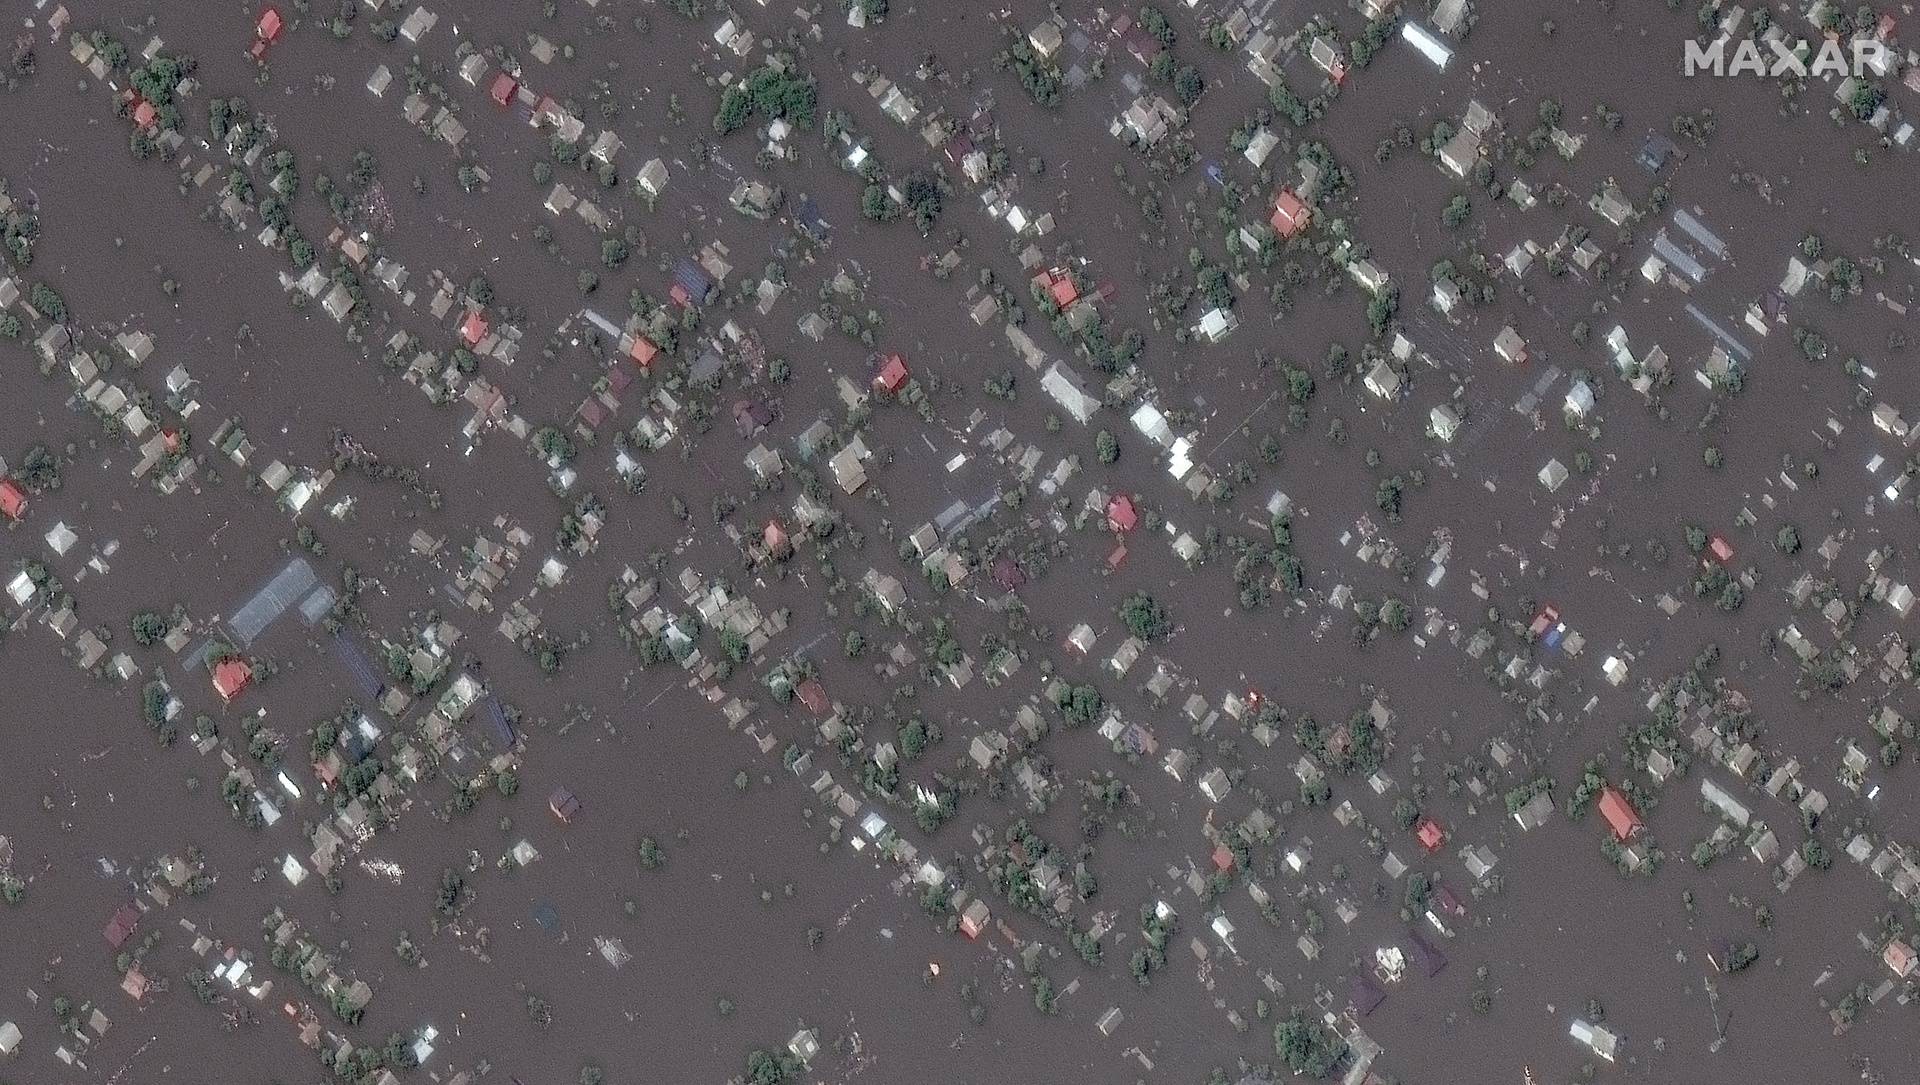 A satellite image shows the flooded town of Oleshky